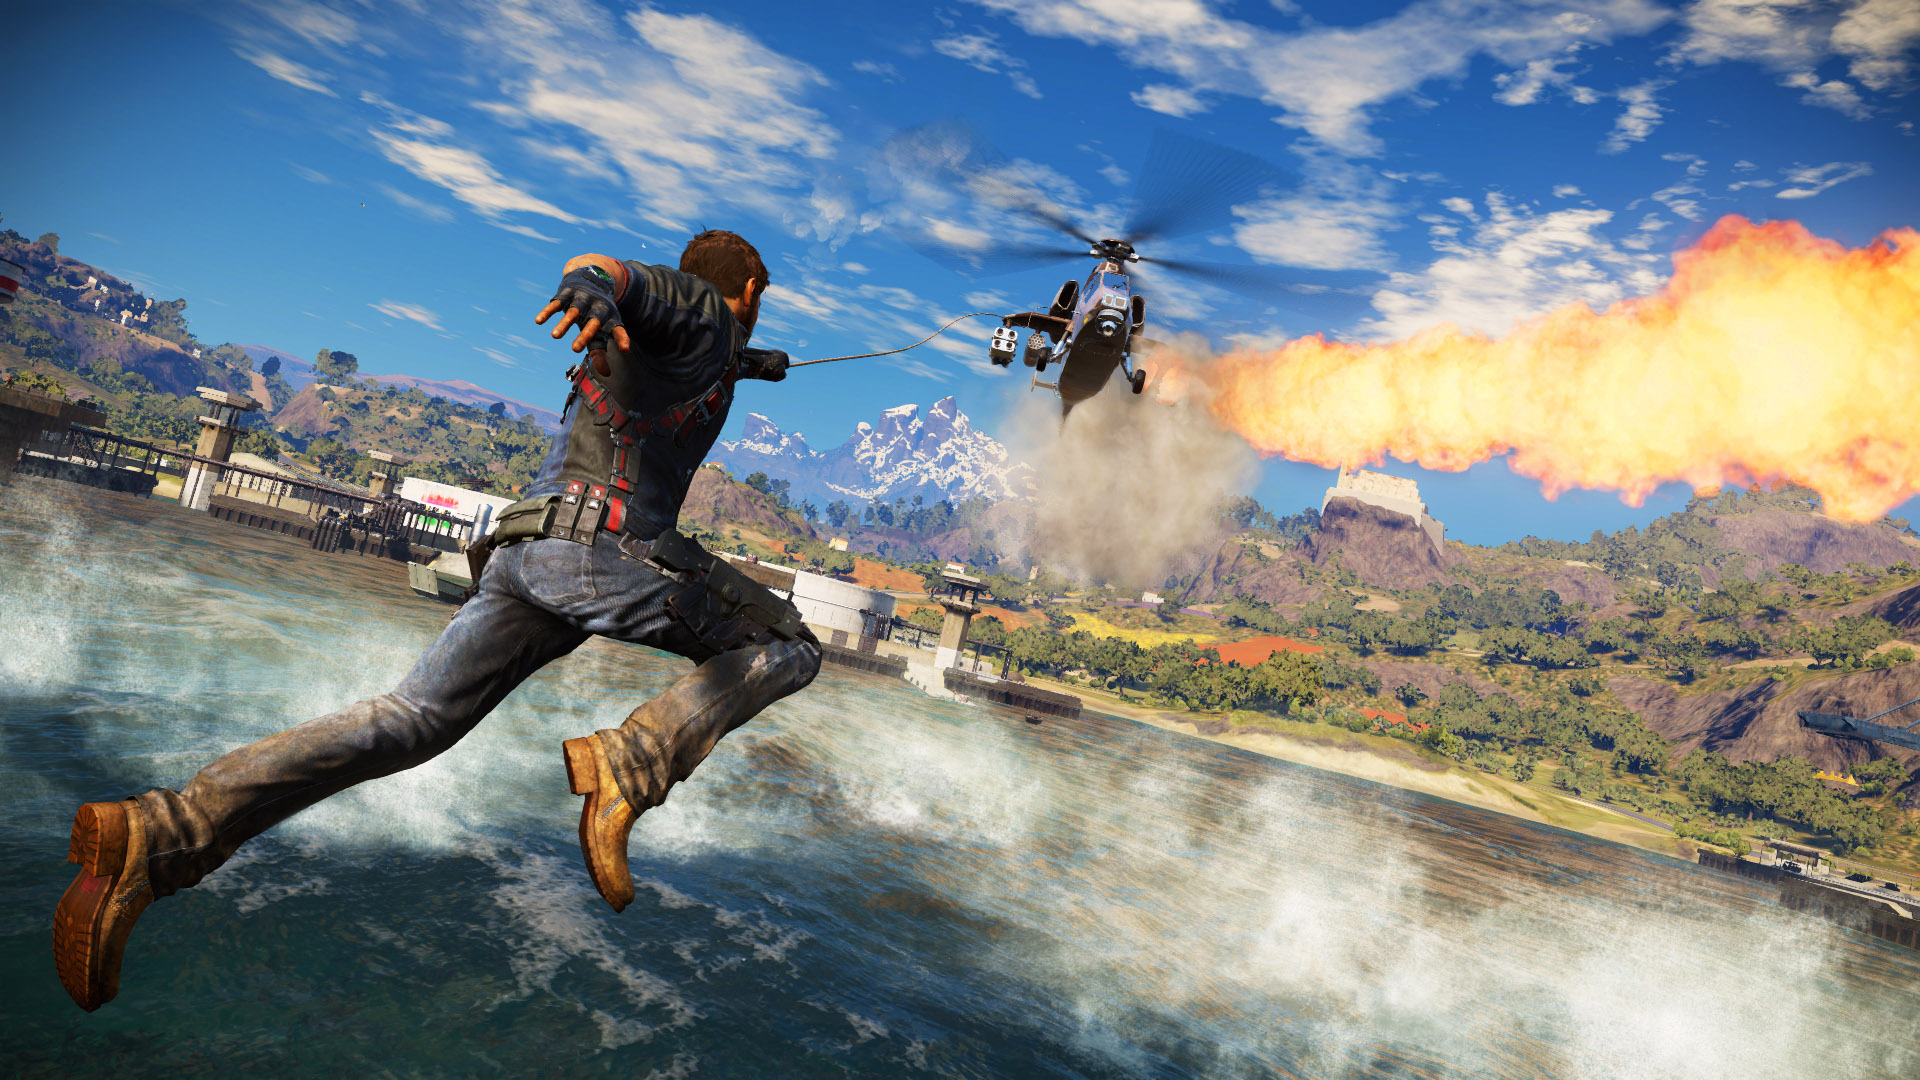 Why Just Cause Is My Game Of The Year